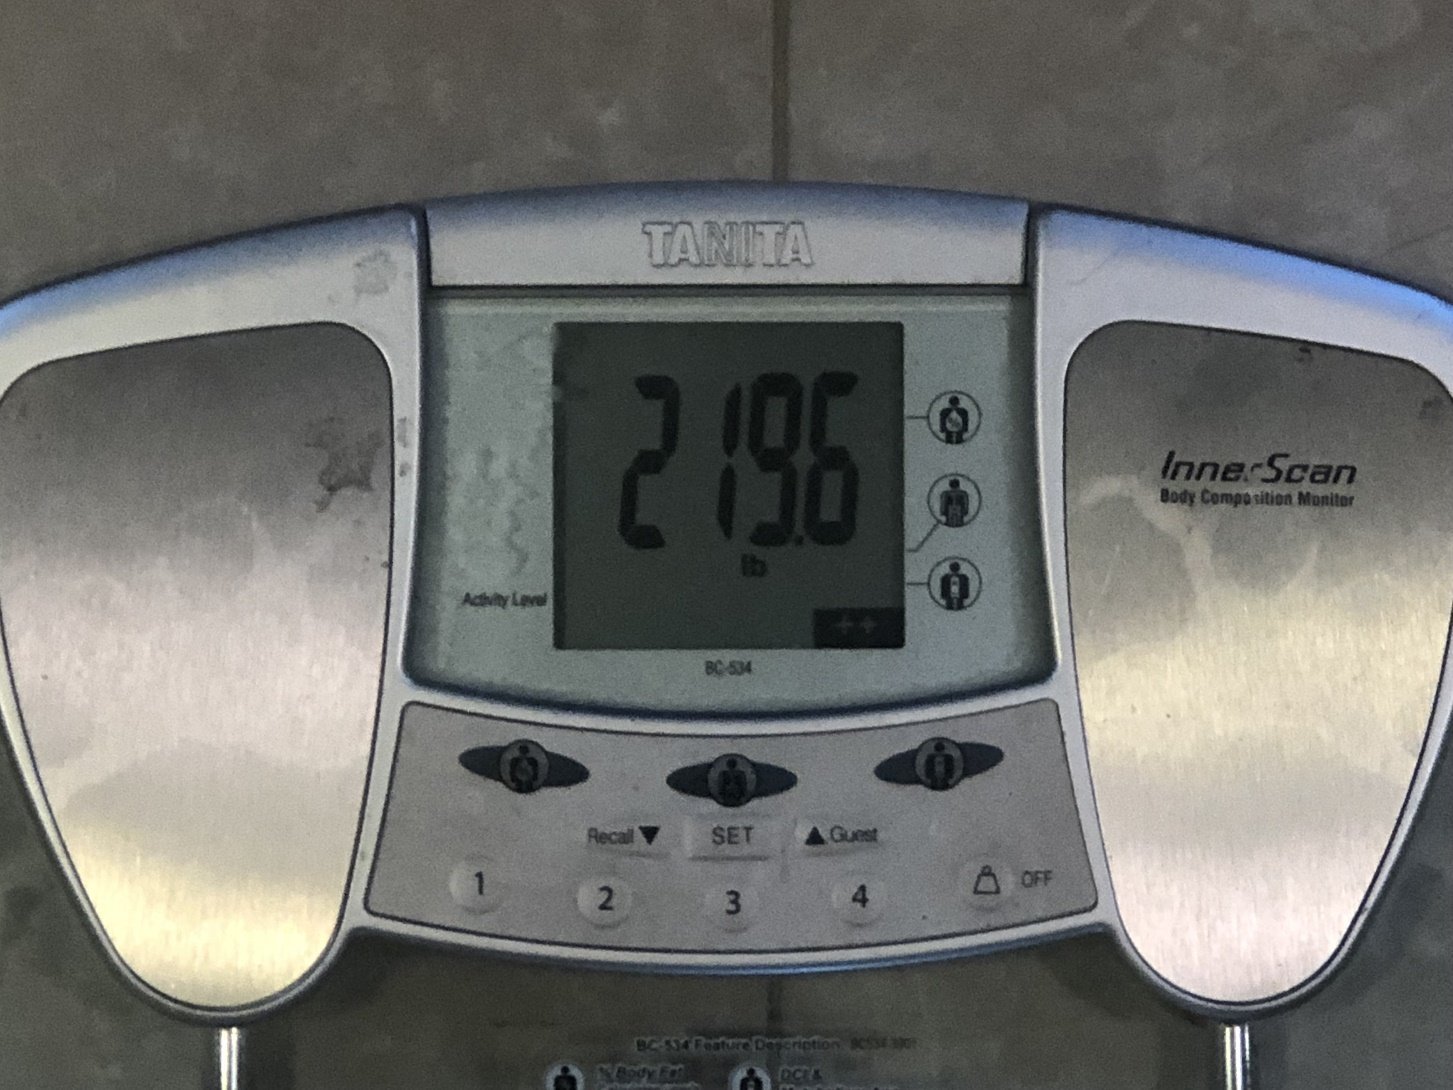 scale reading 219.6 pounds